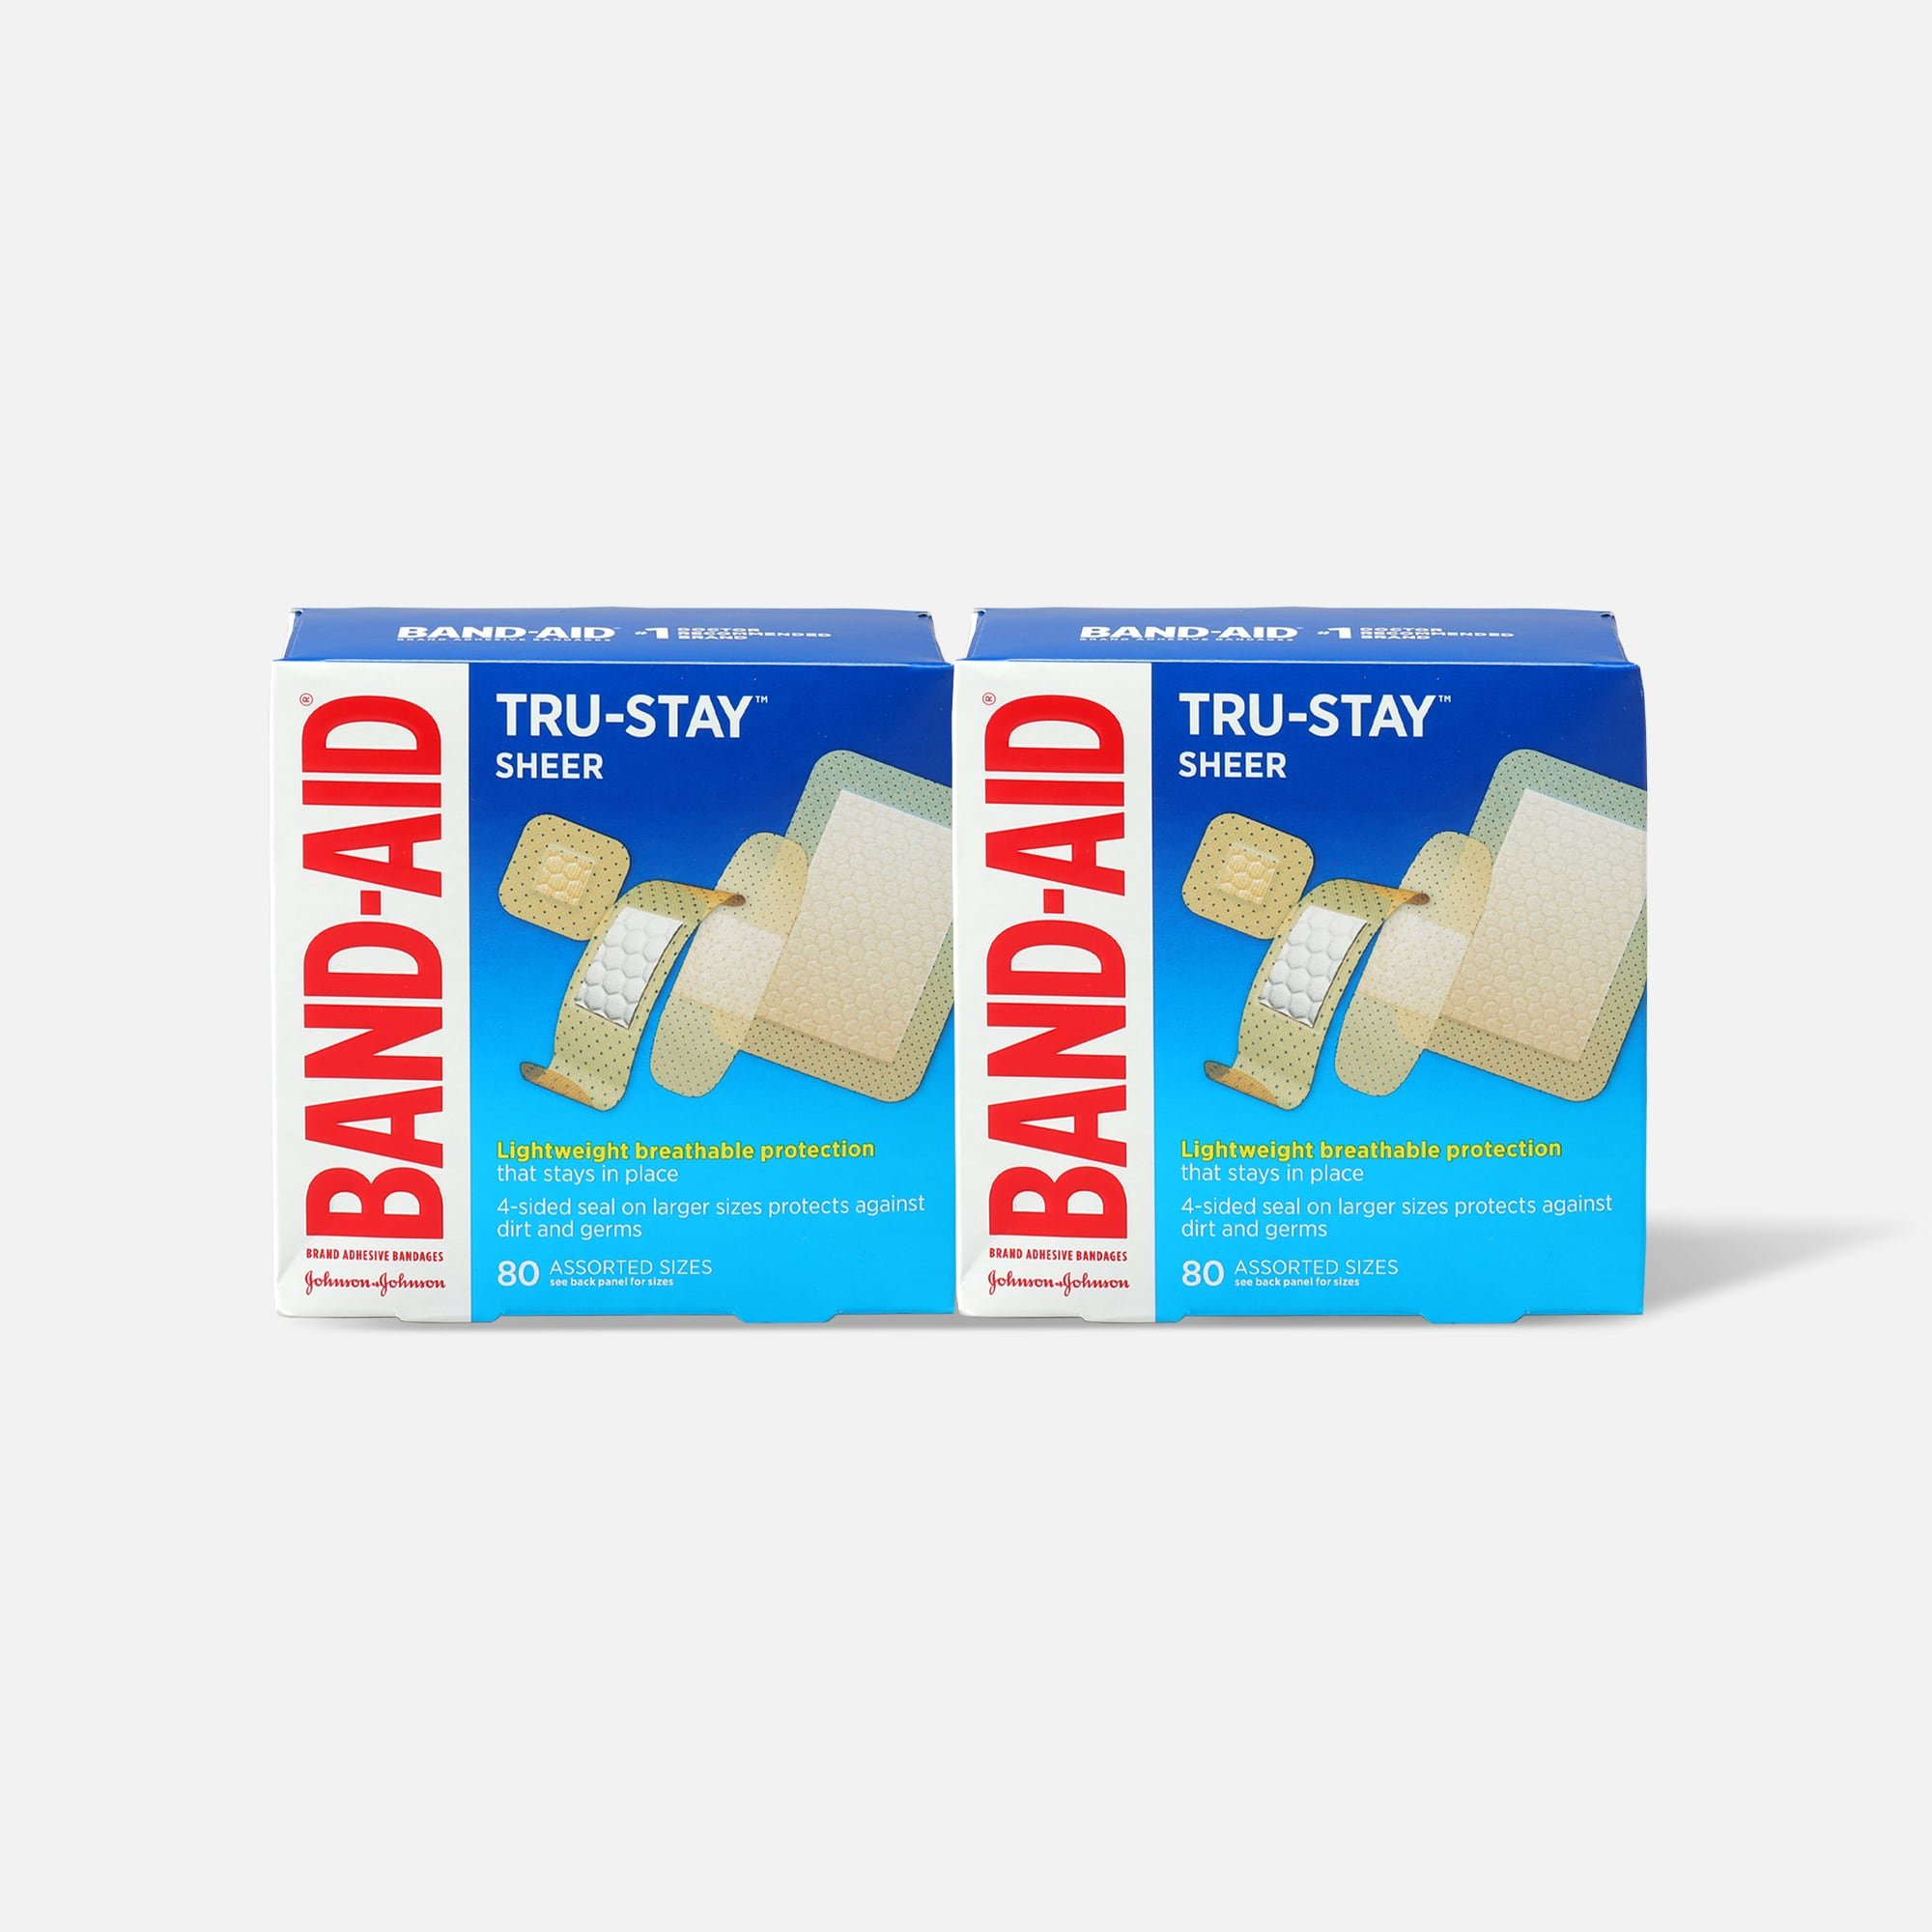 FSA Eligible  Band-Aid Sheer Adhesive Bandages, Assorted, 80 ct. (2-Pack)